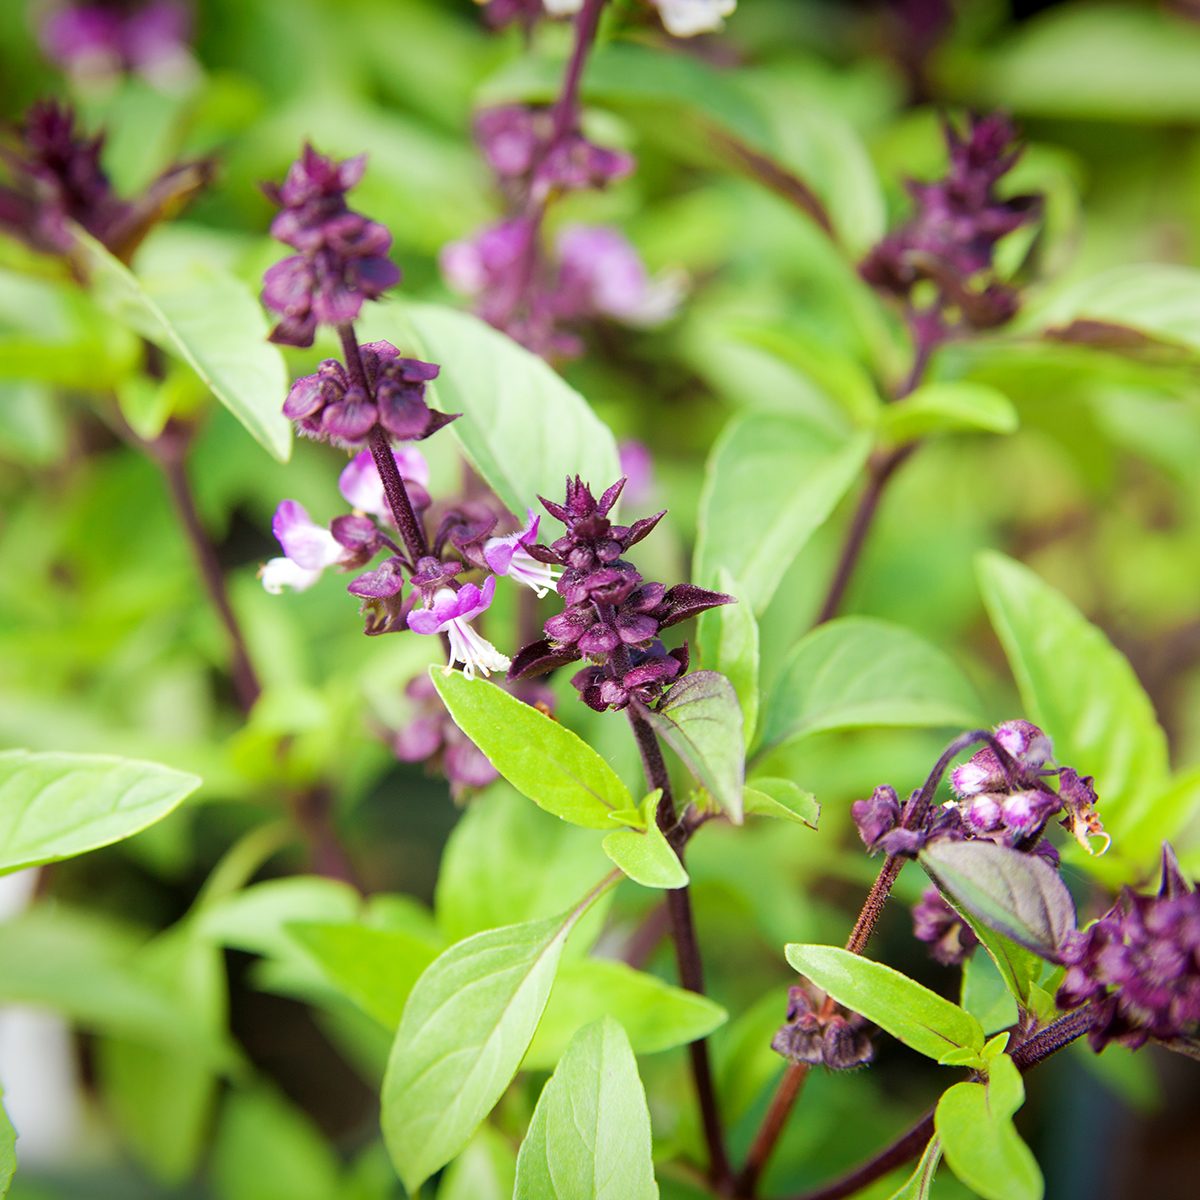 Close-up of fresh Thai basil plants in a plant nursery. The leaves of the plant basil is a popular Asian herb in cooking and the Southeast Asian cuisine. Photographed in horizontal format.